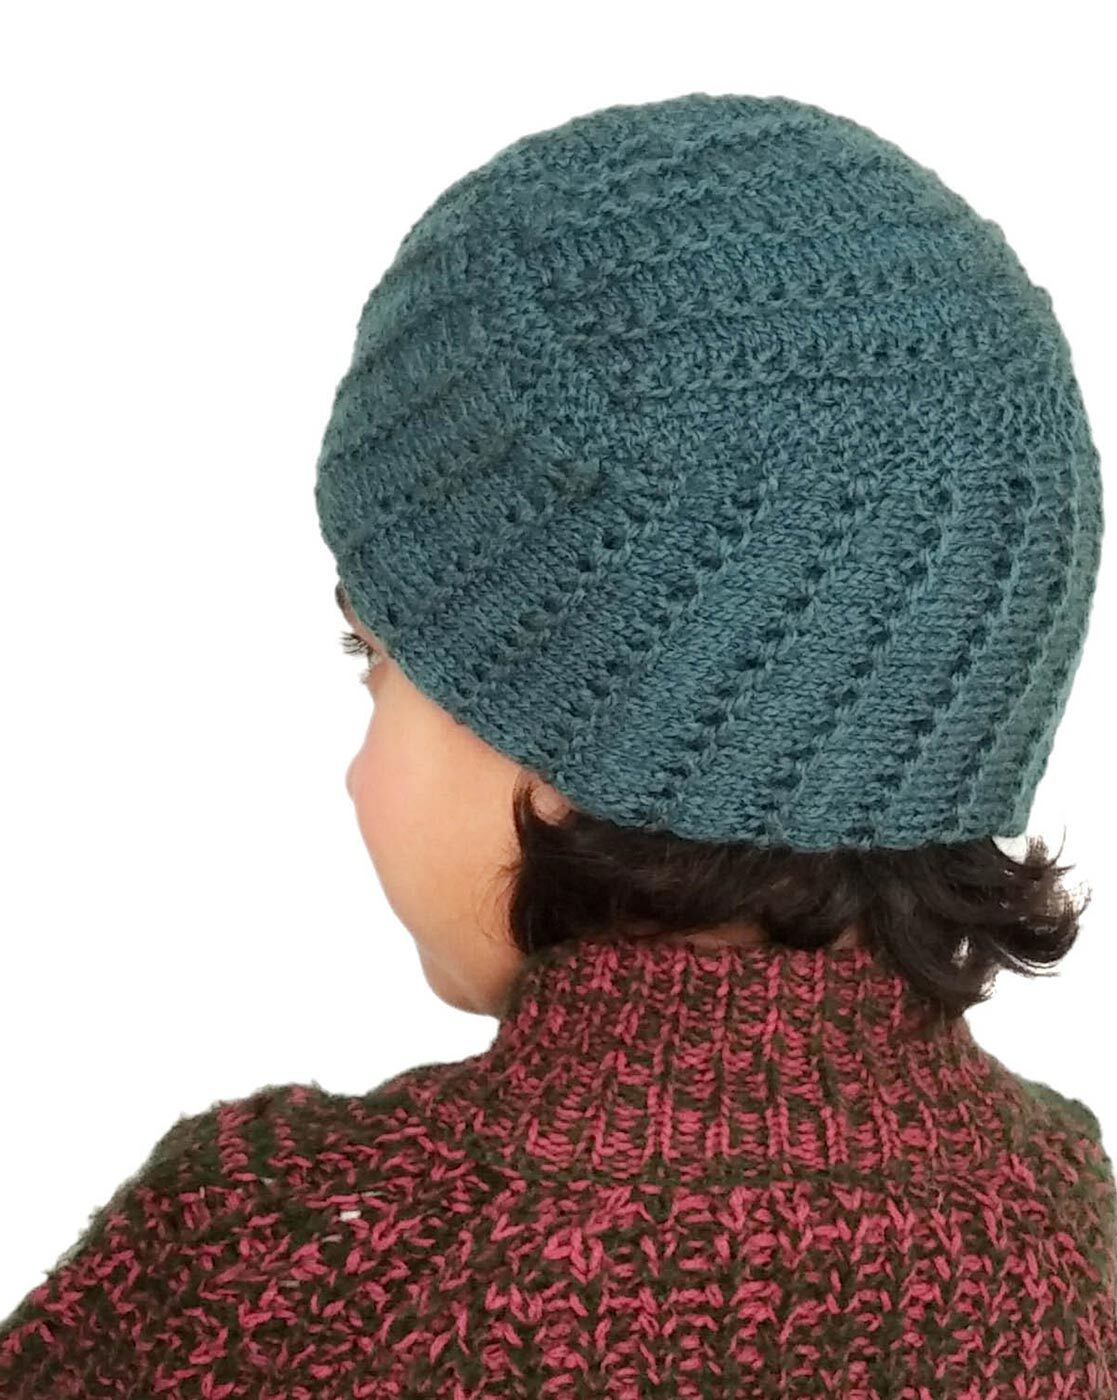 Bharatasya Knitted Winter Slouchy Boho Cap and Scarf in Monogram pattern in  Soft Acrylic Wool Blend